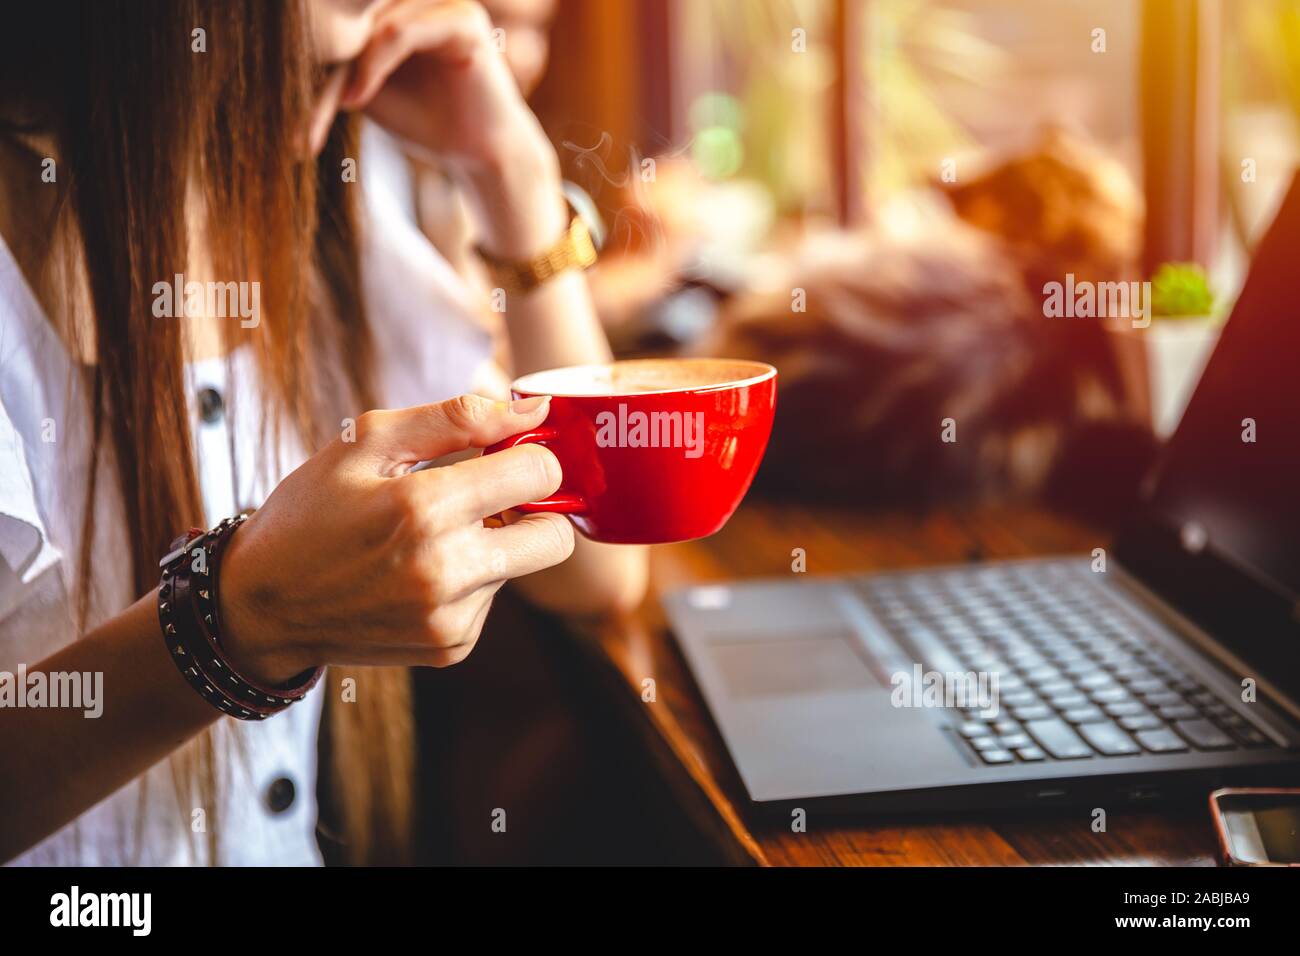 Freelace businesswoman hand holding coffee mug working with laptop computer on wooden table for business cafe hopper lifestyle. Stock Photo